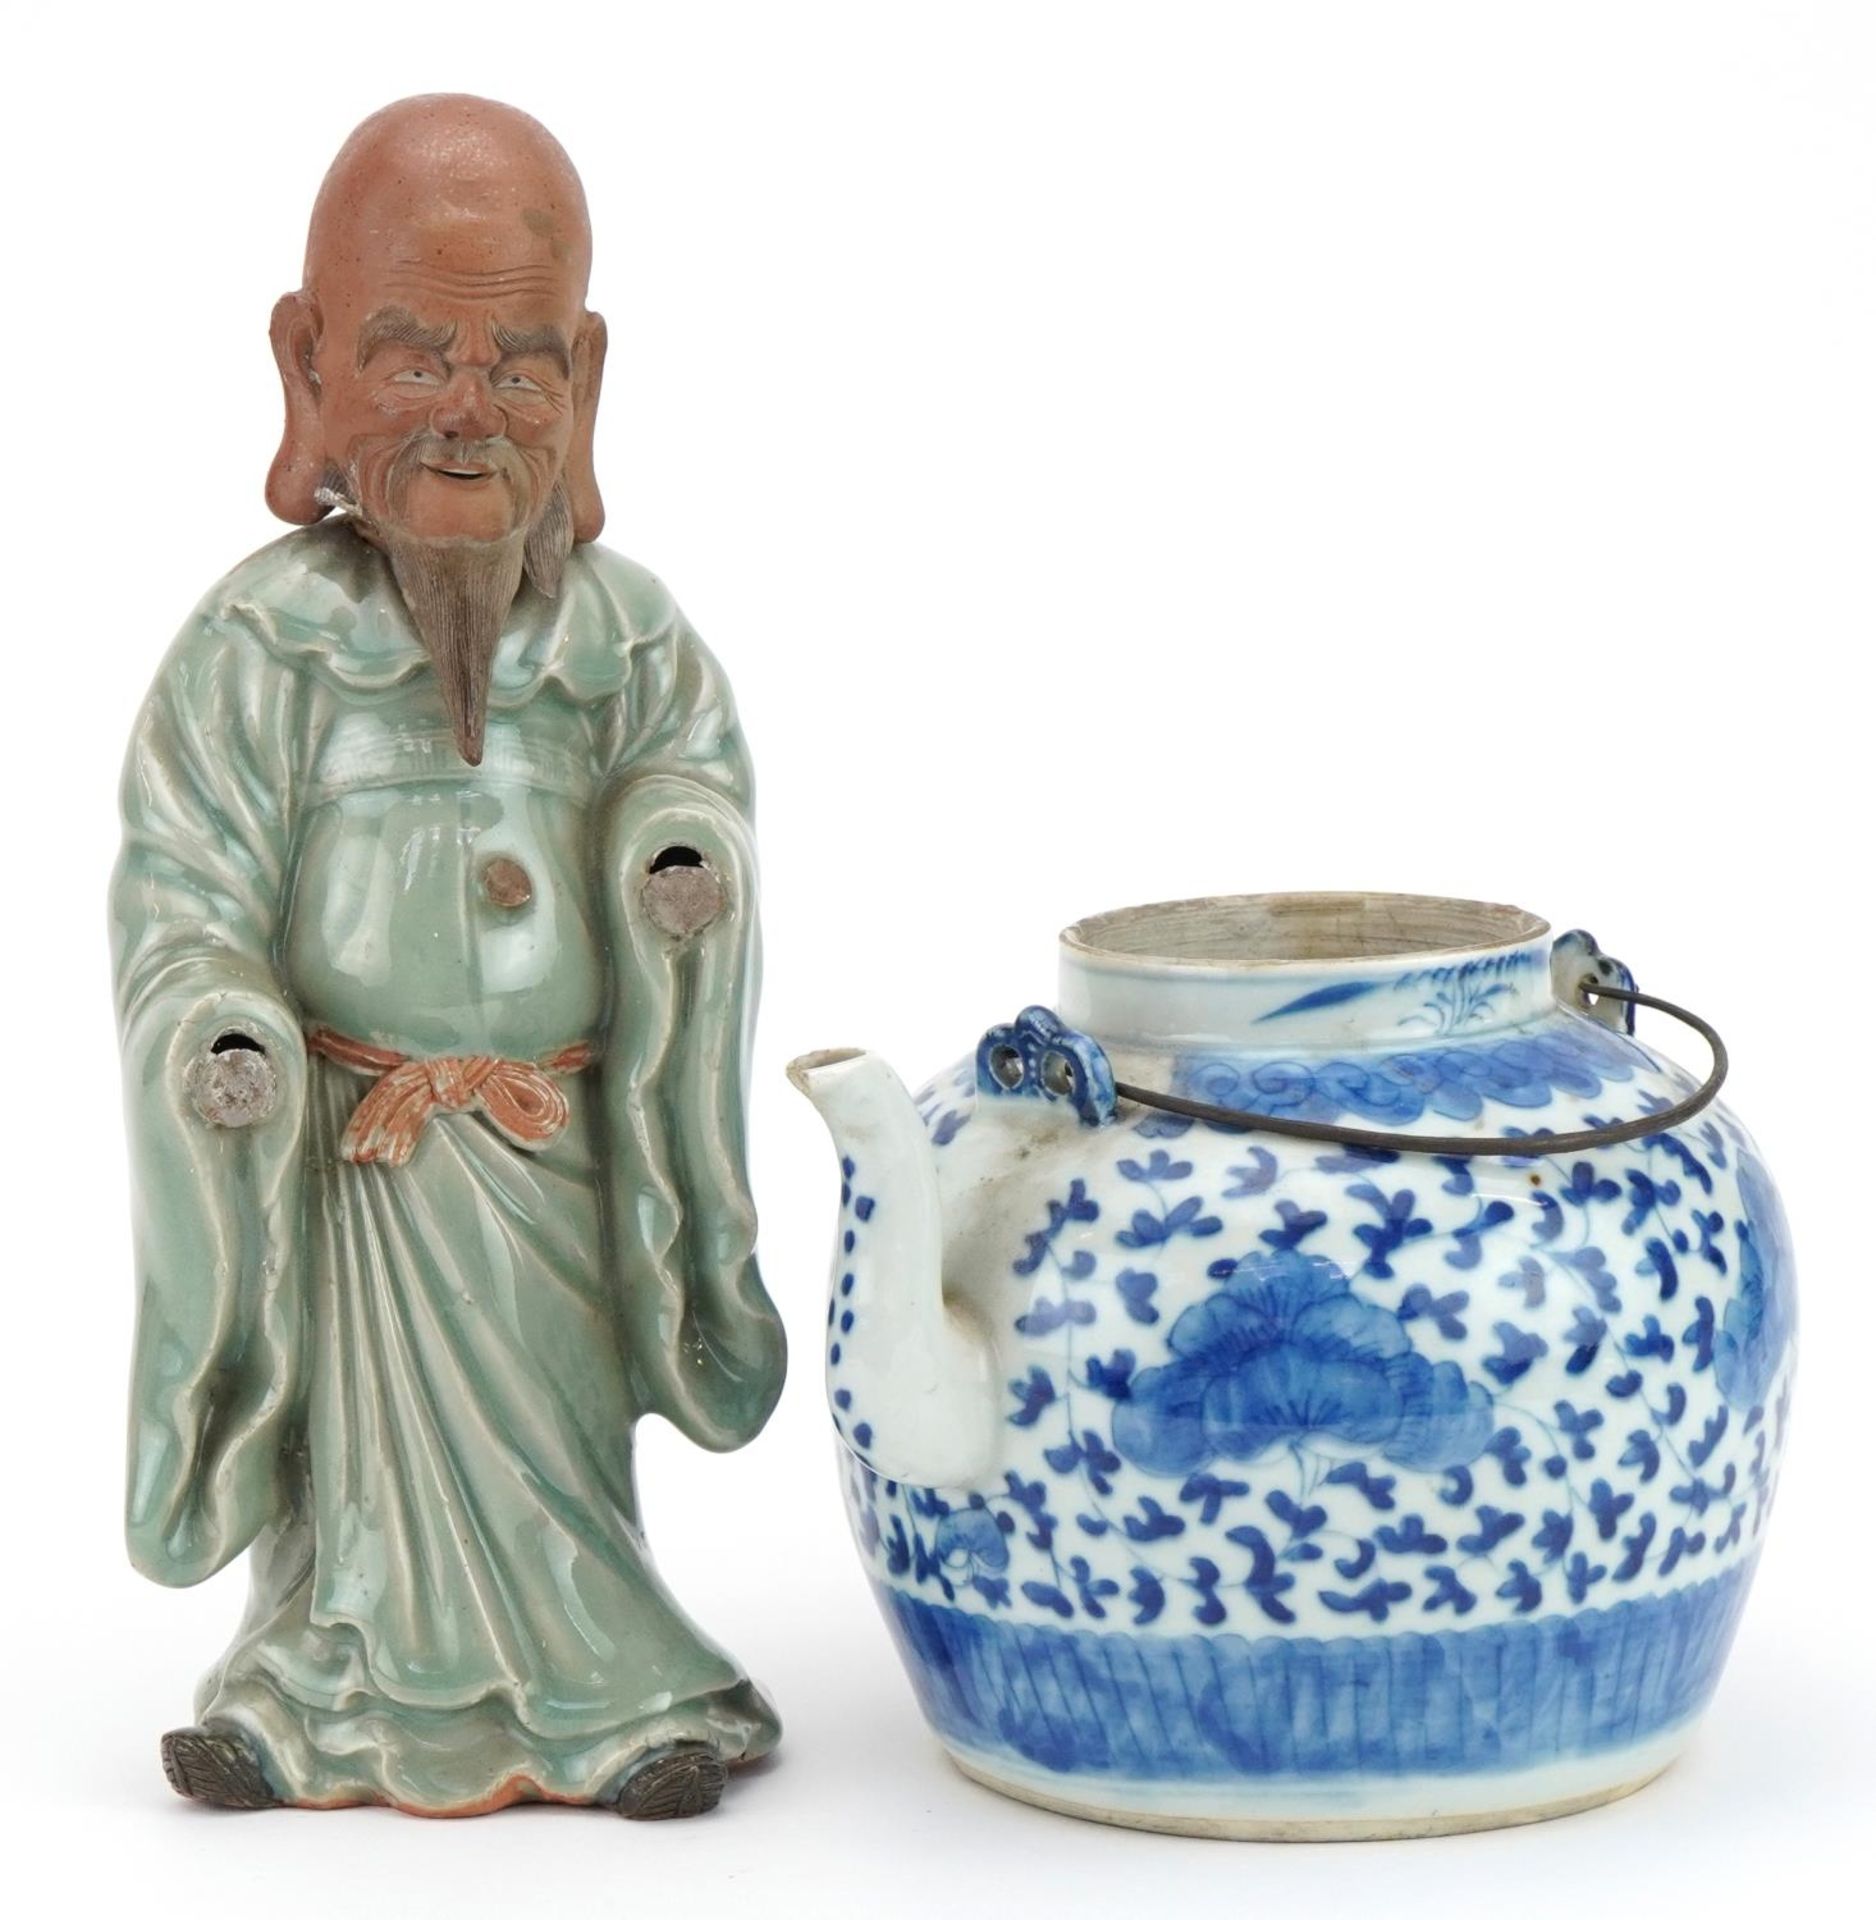 Chinese blue and white porcelain teapot and a celadon glazed figure, the largest 30cm high